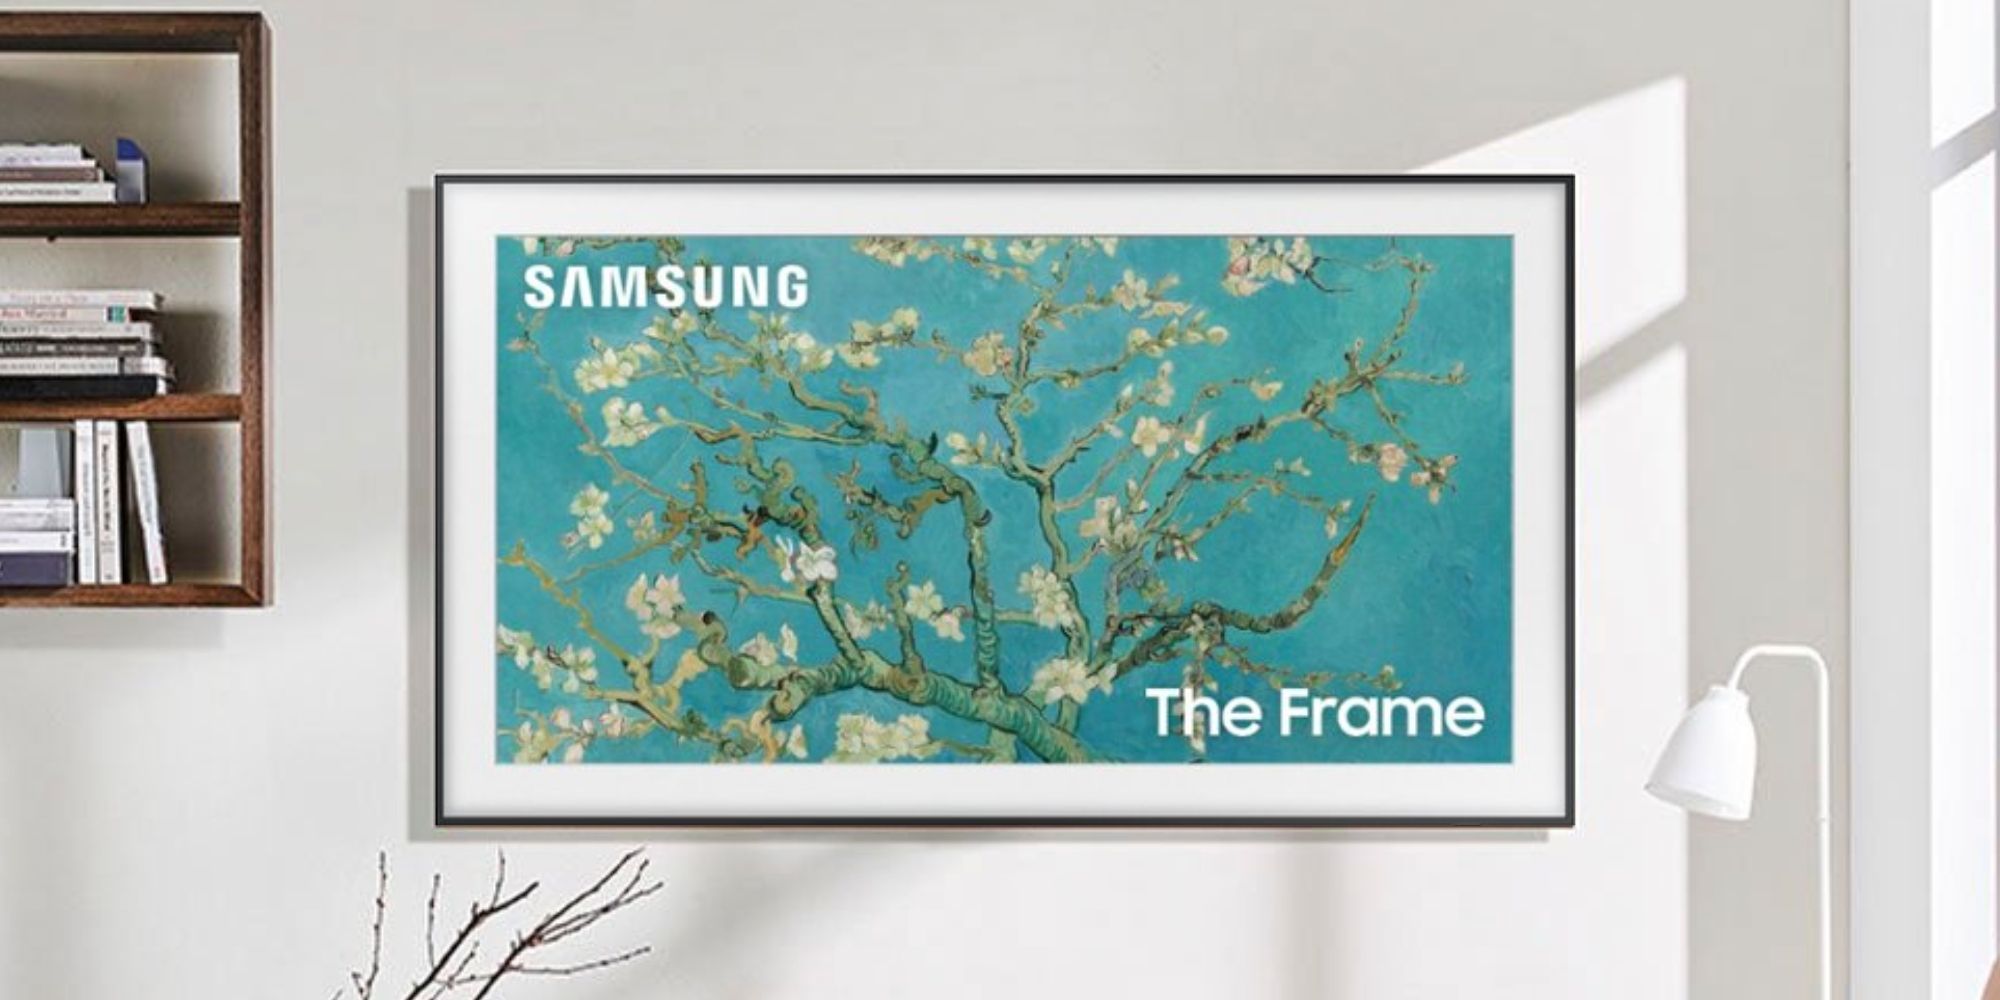 Get the Samsung Frame TV on a discount today